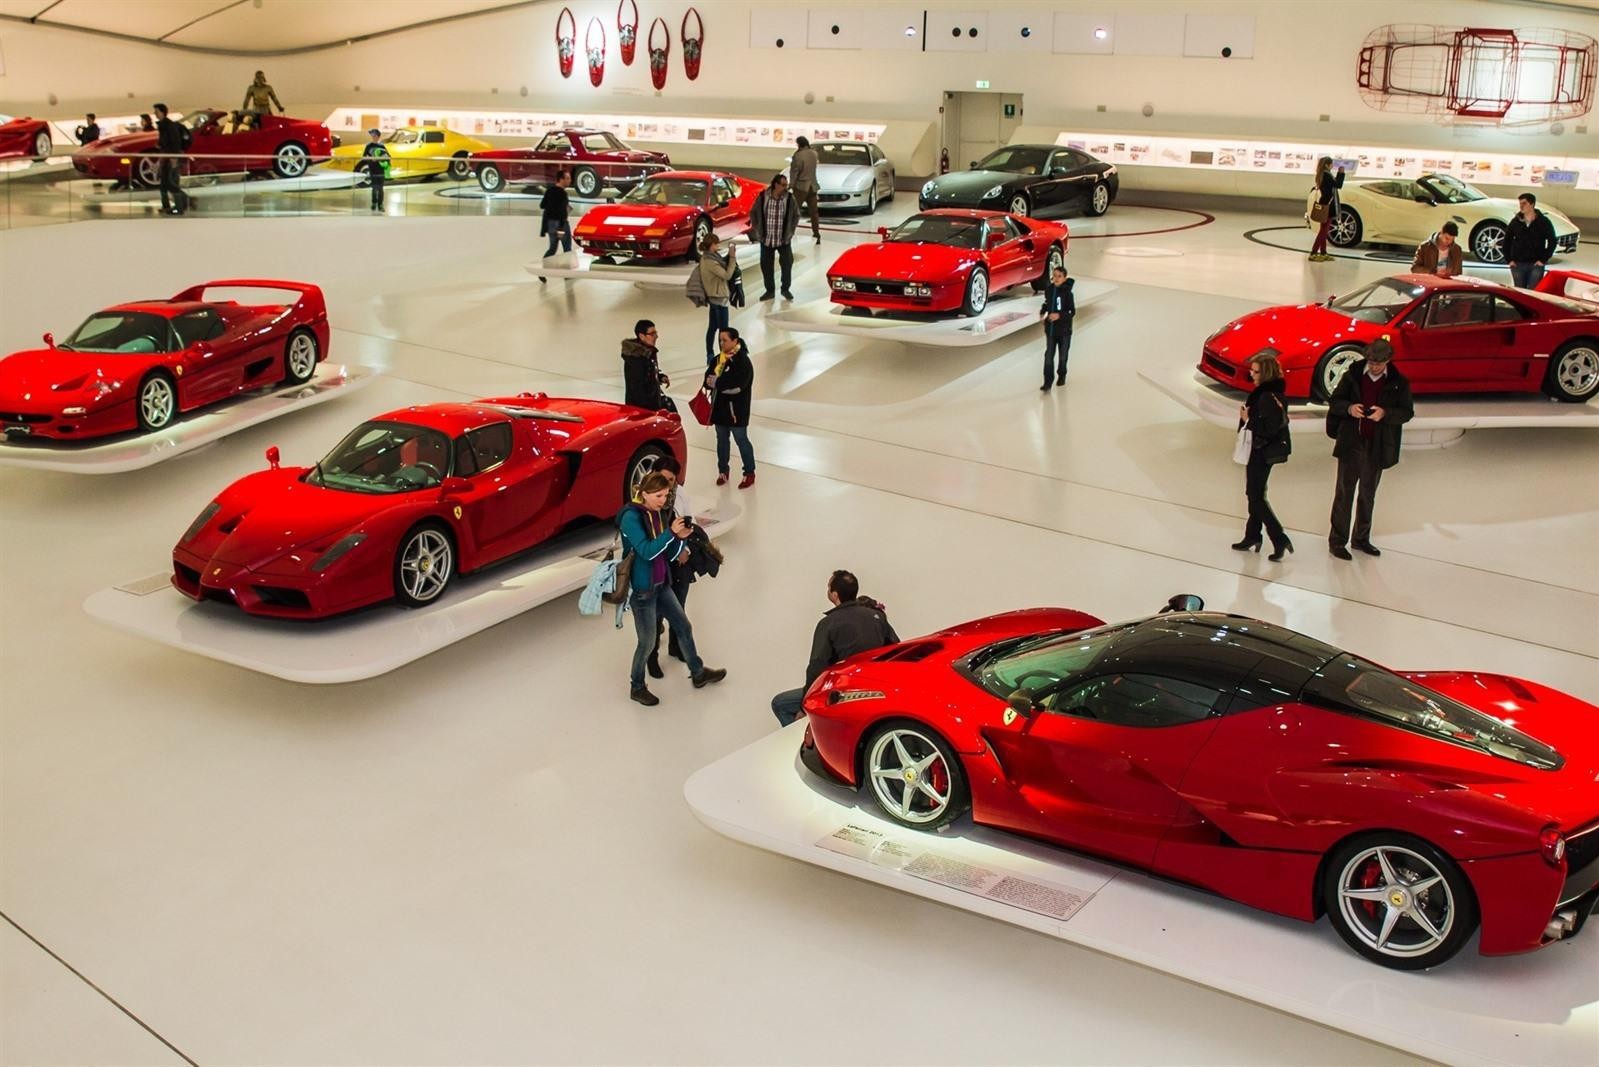 Please bear with me: The majority of Ferrari models were sold out